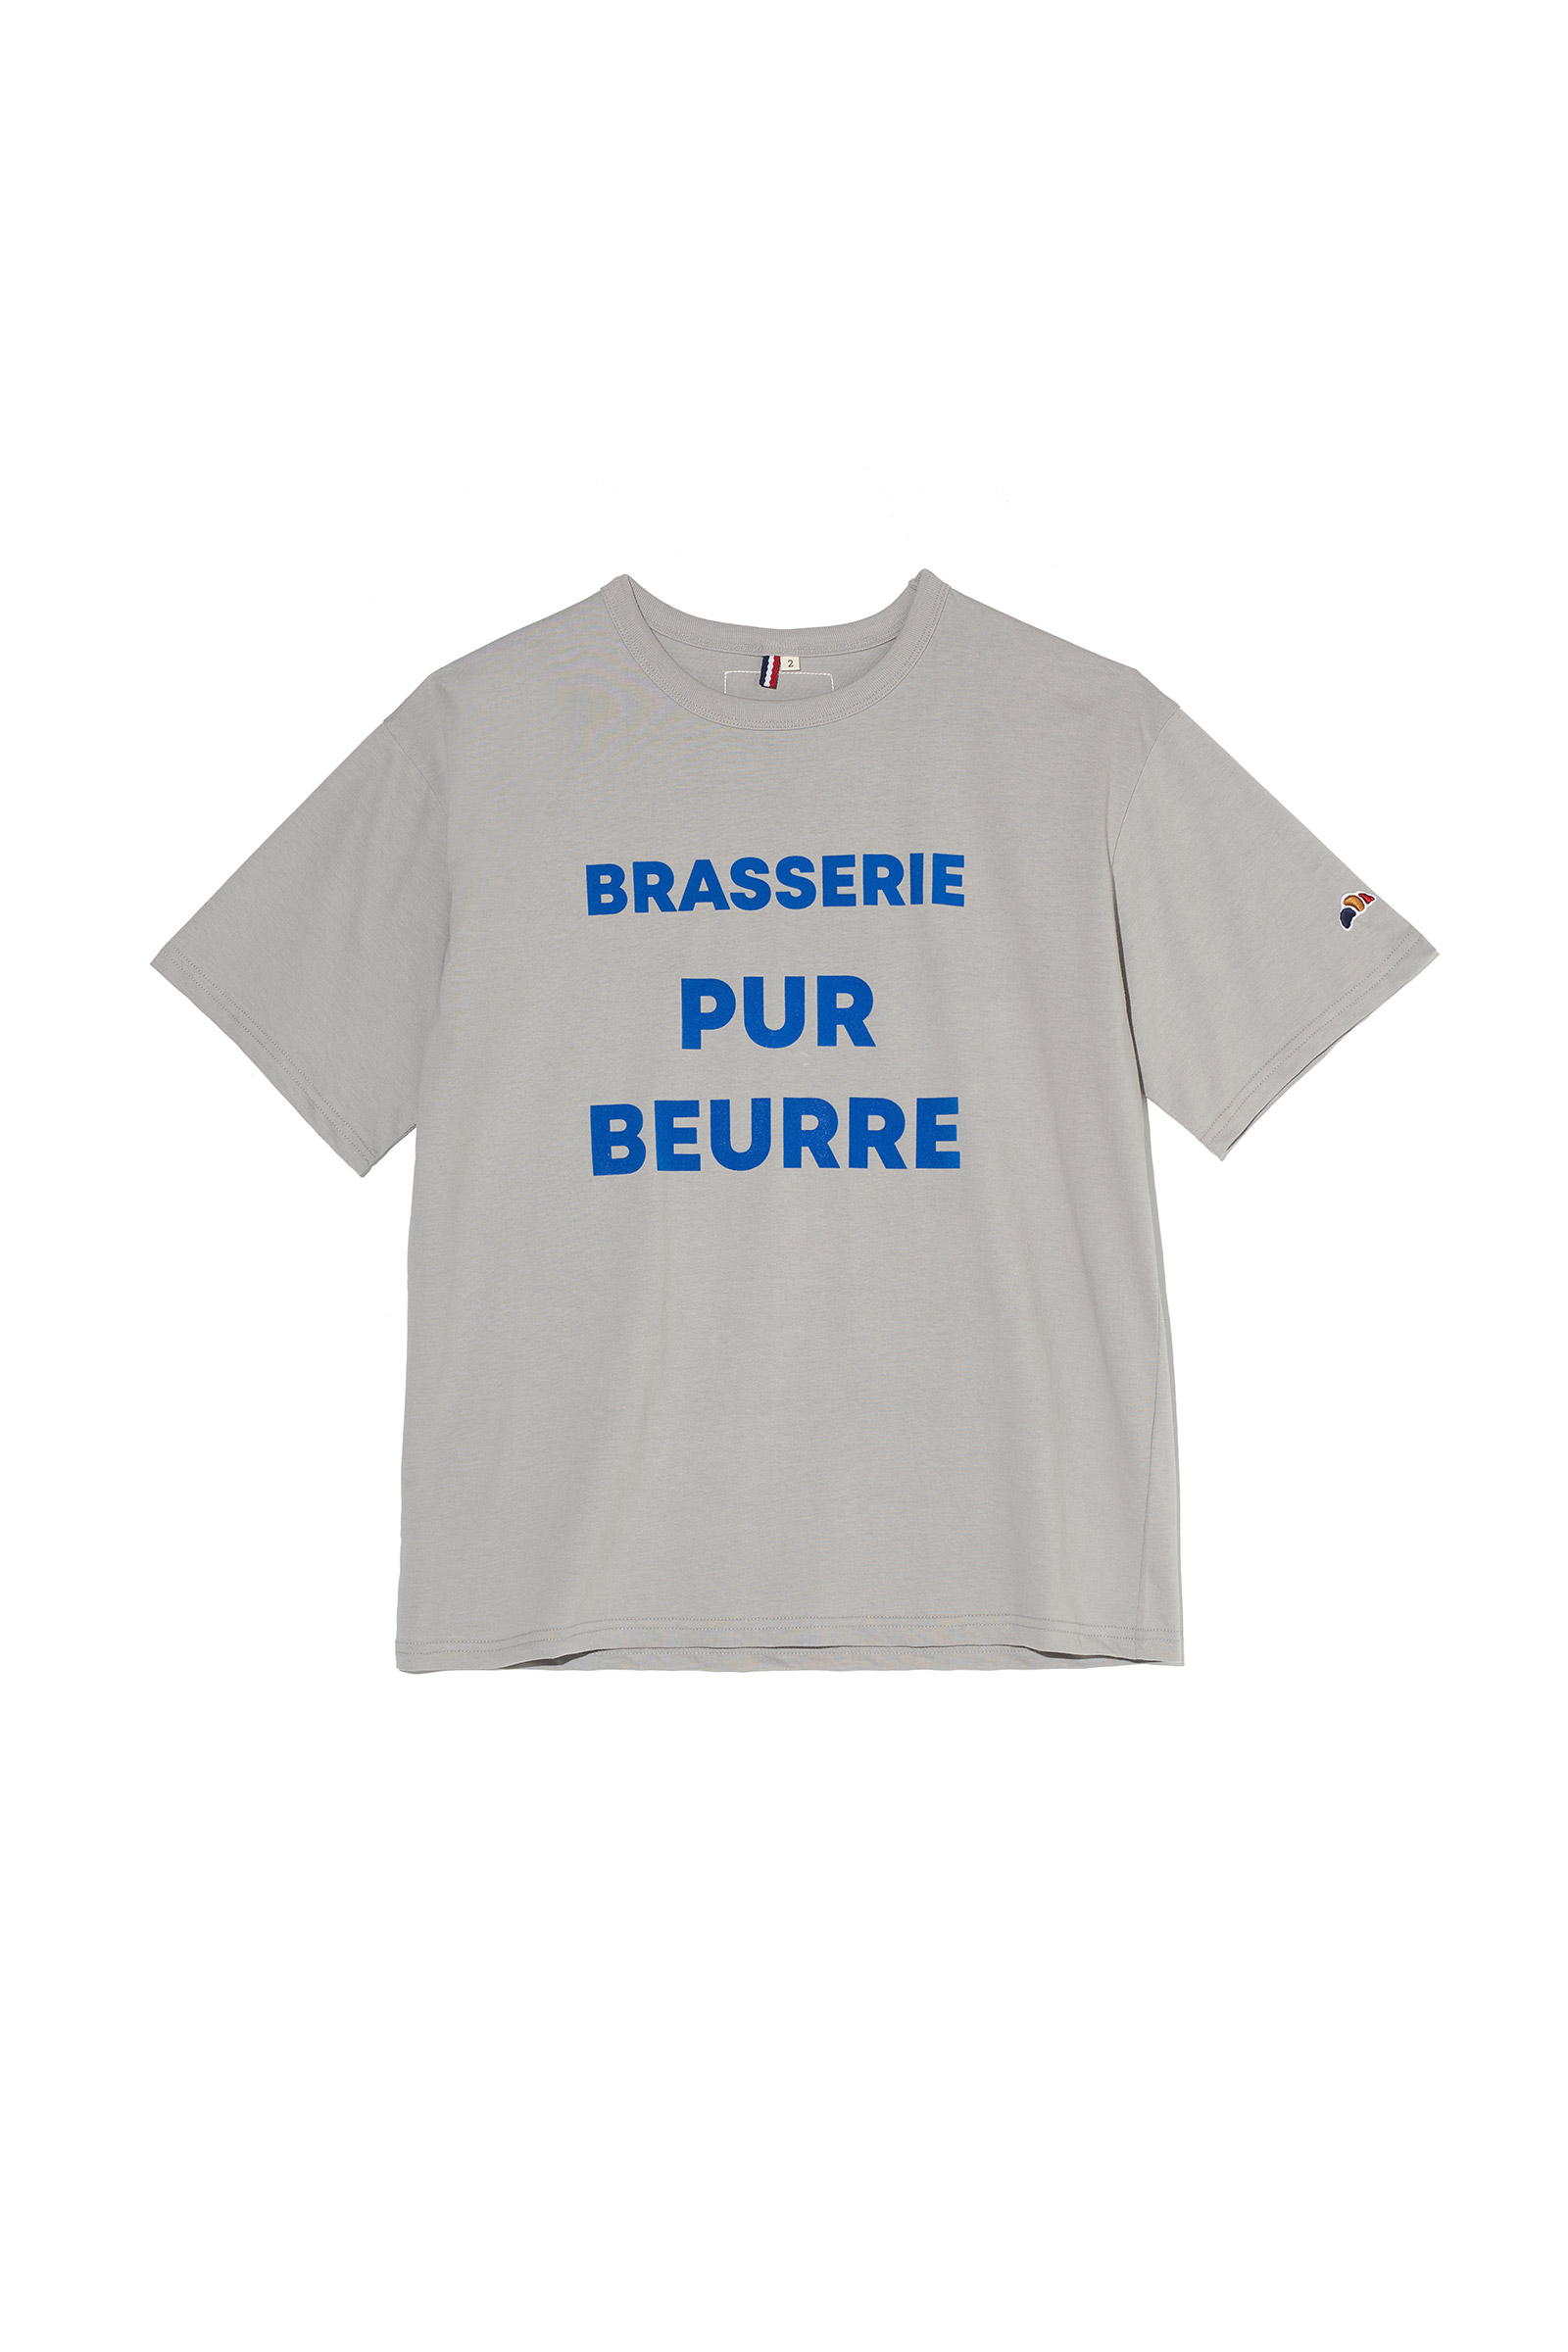 ep.4 Pur Beurre T-shirts (Grey)